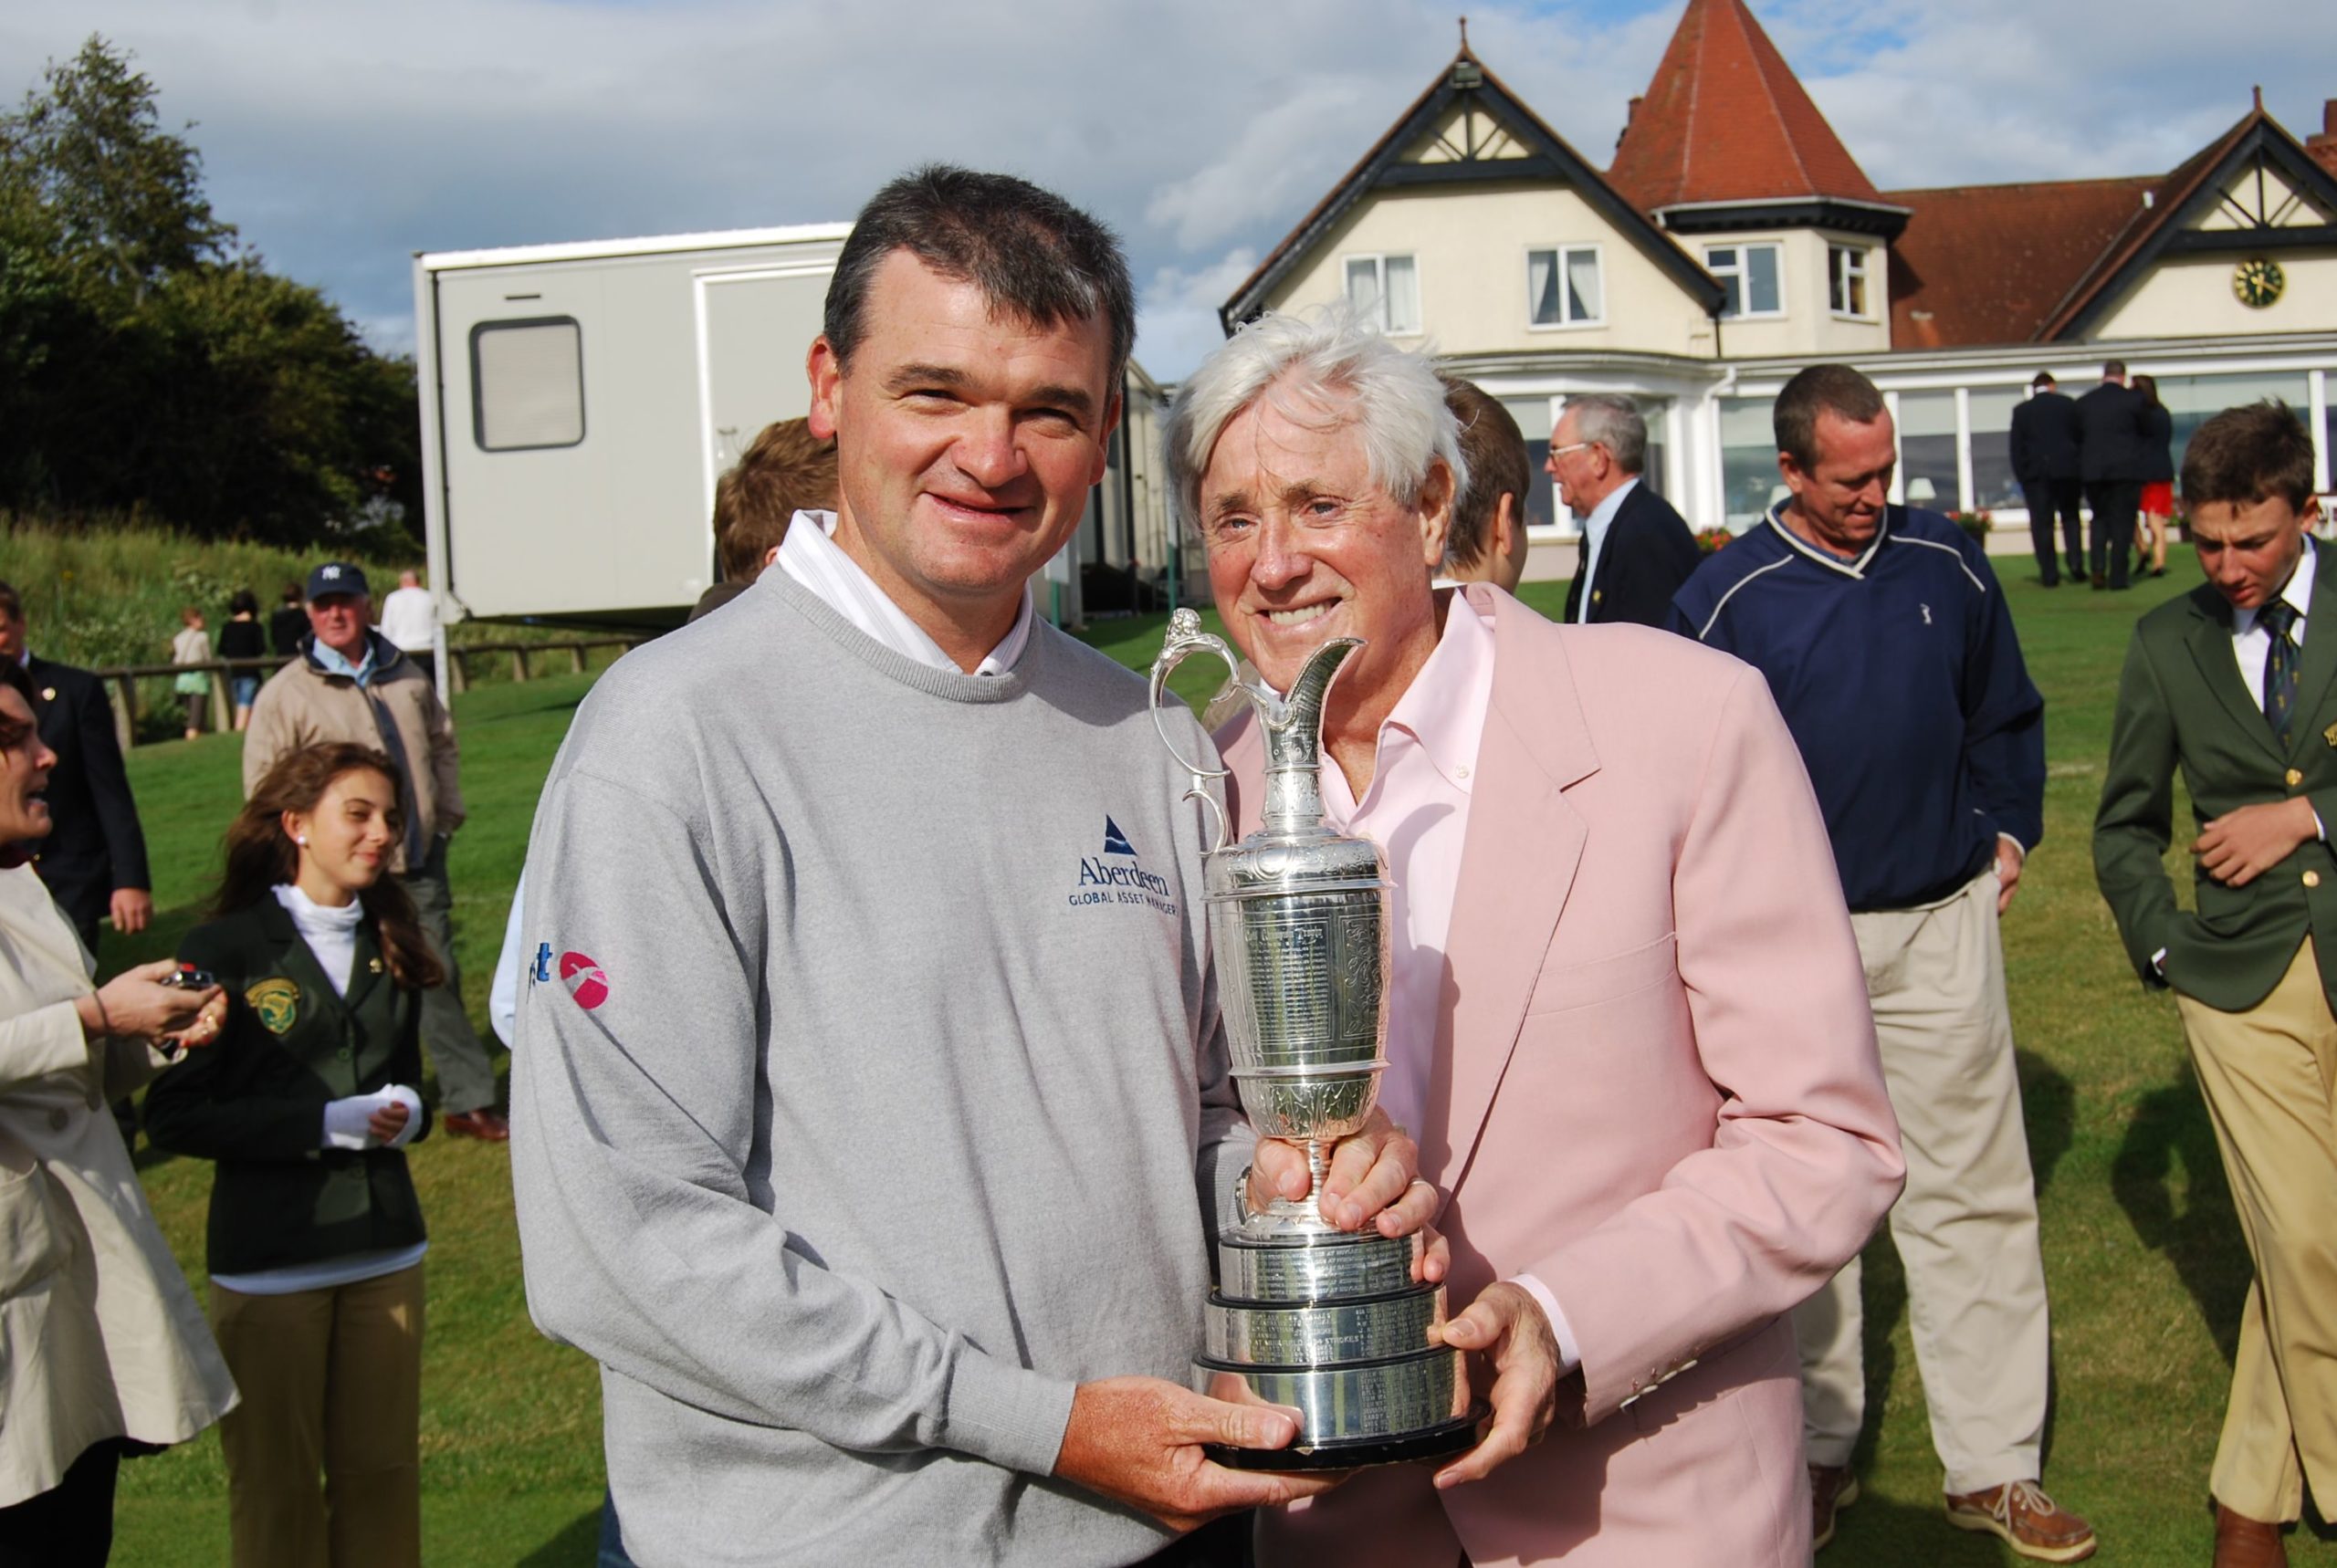 Doug Sanders with Paul Lawrie, at the 2010 Junior Open opening ceremony at Lundin Golf Club, Fife.